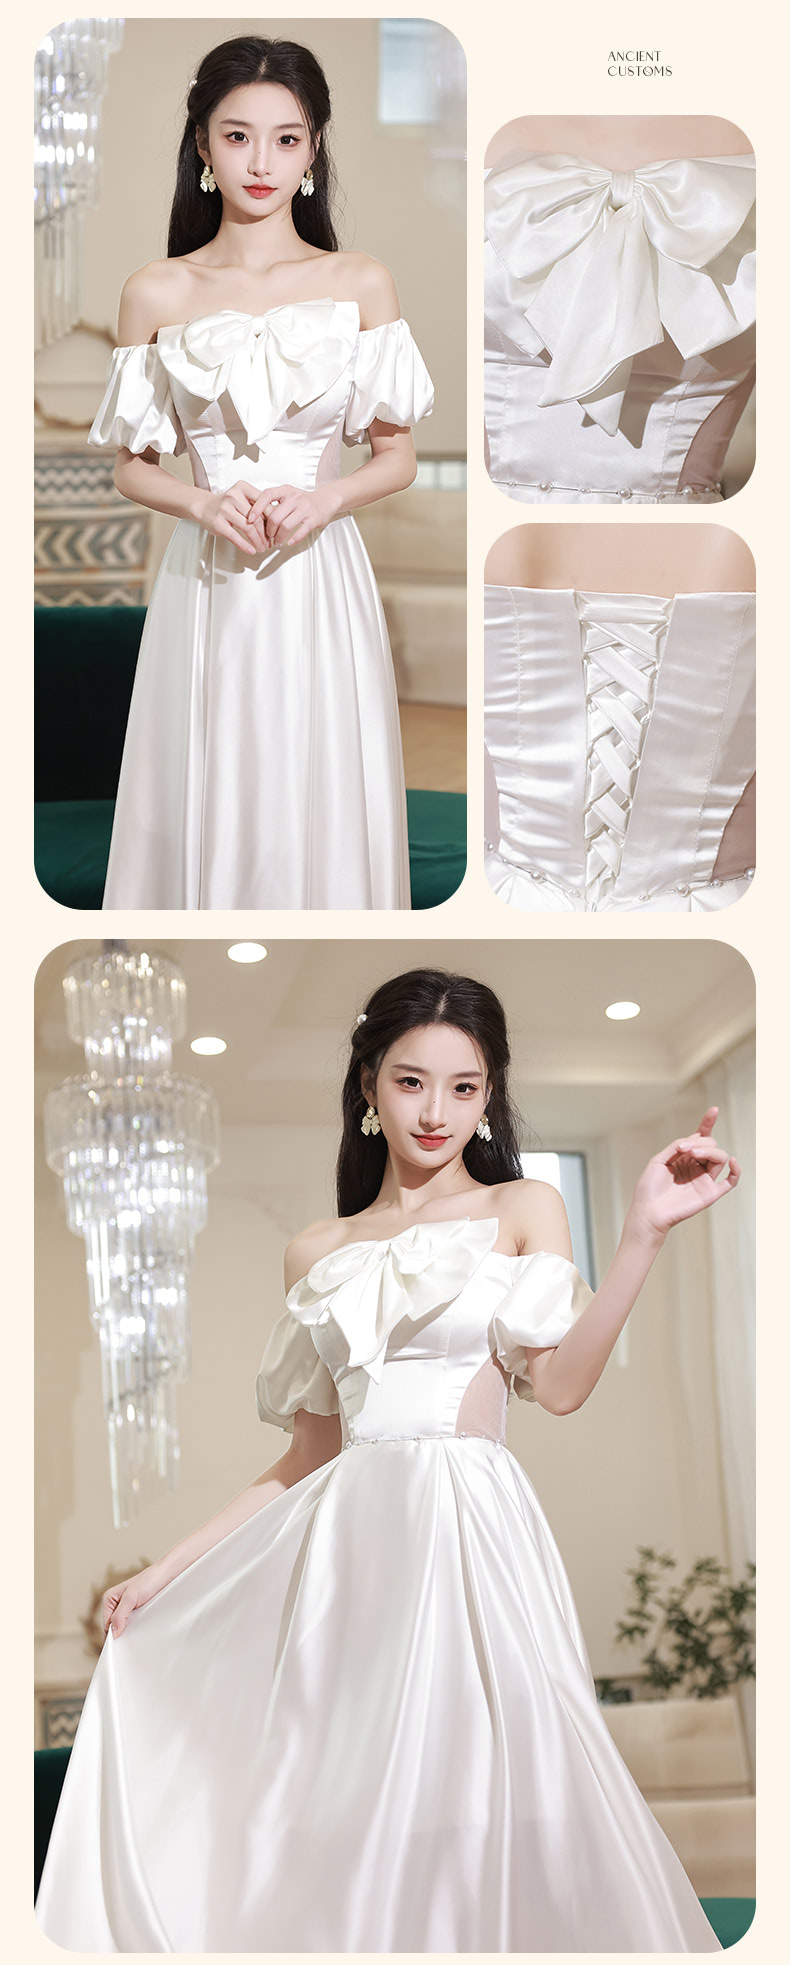 Sweet-White-Satin-Wedding-Party-Dress-Homecoming-Evening-Gown27